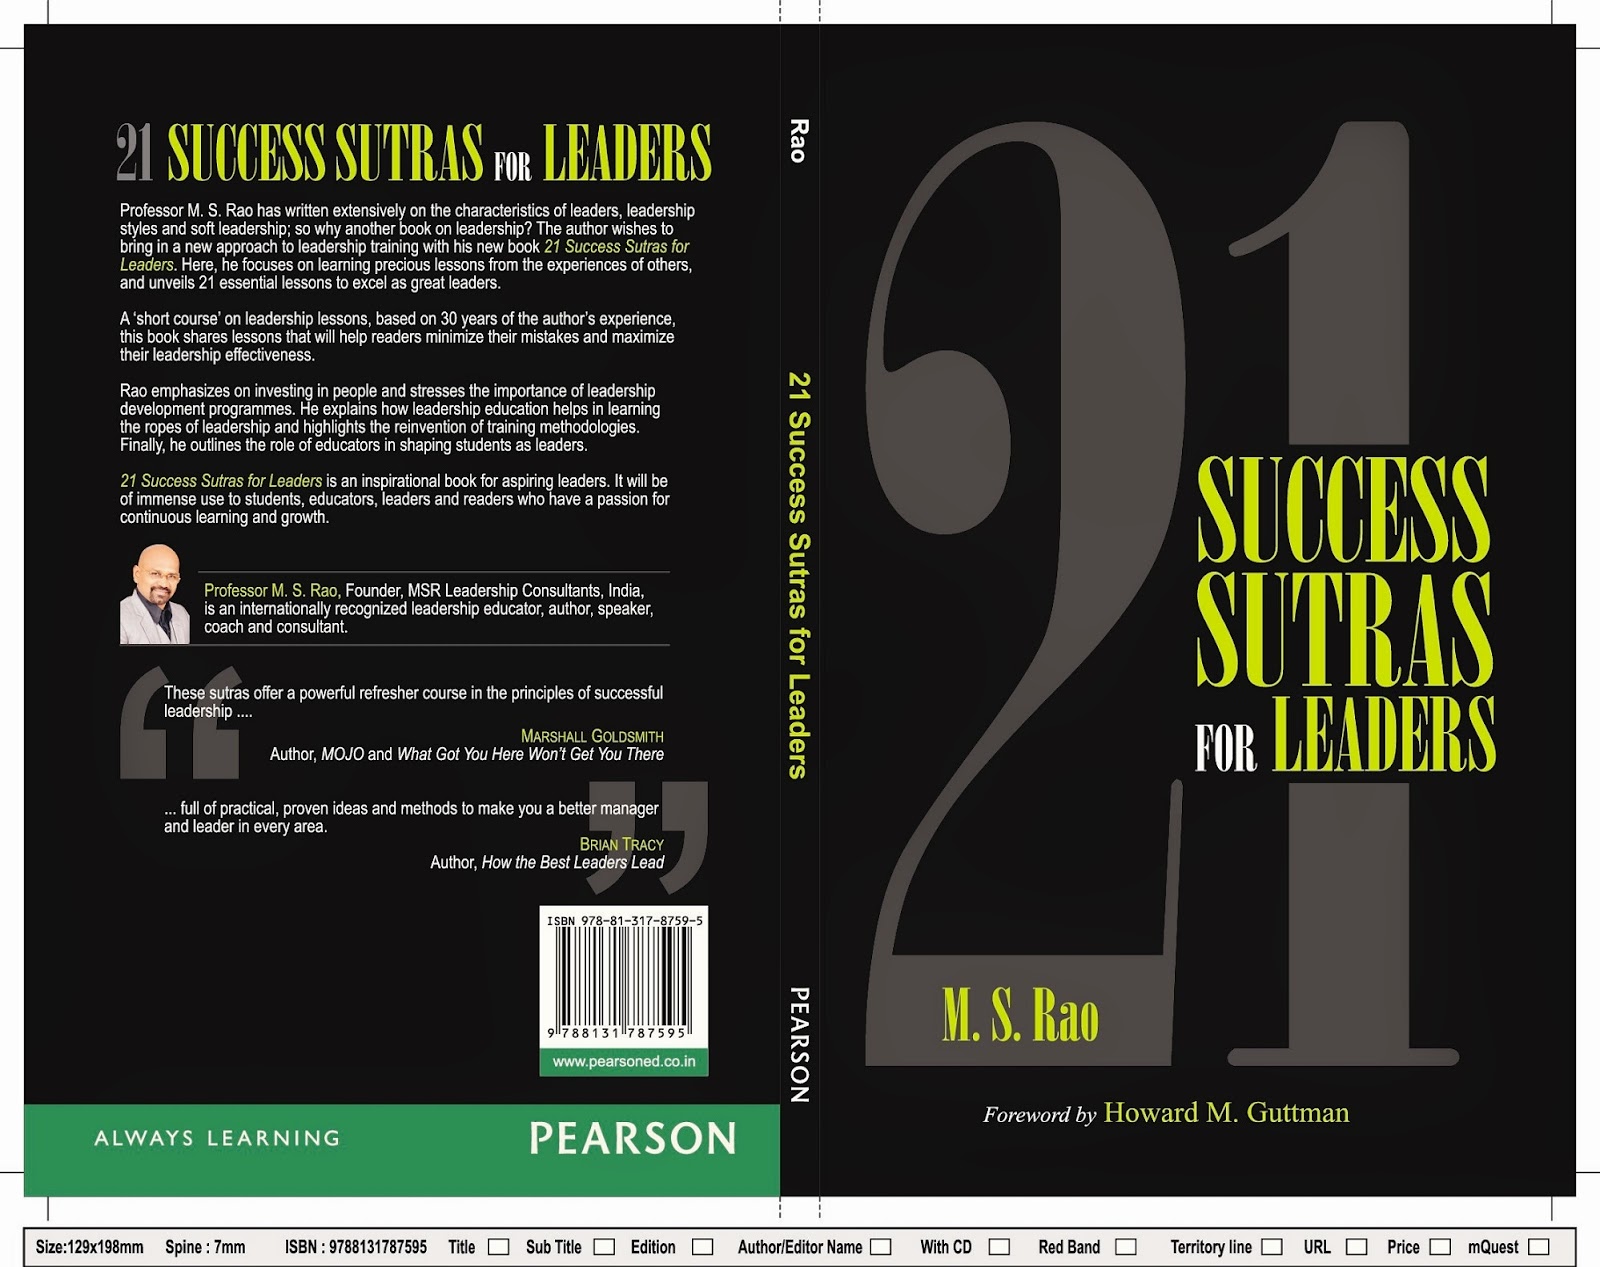 Professor M S Rao Born For The Students Professor M S Rao S Award Winning 21 Success Sutras For Leaders Ranked As Top Ten Leadership Books By San Diego University Usa